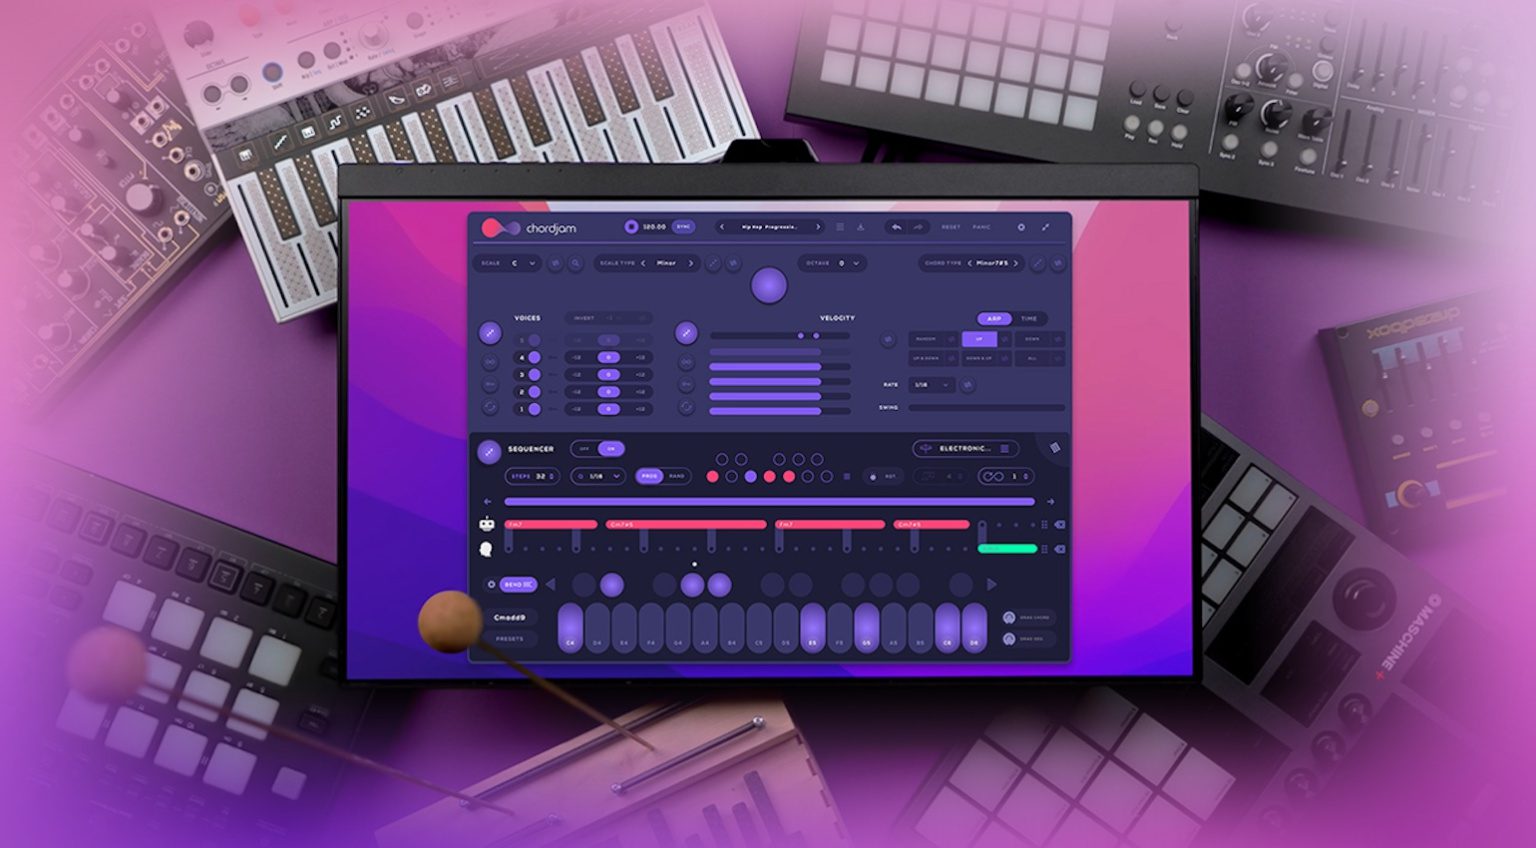 Audiomodern Chordjam 1.5 is here with MPE support